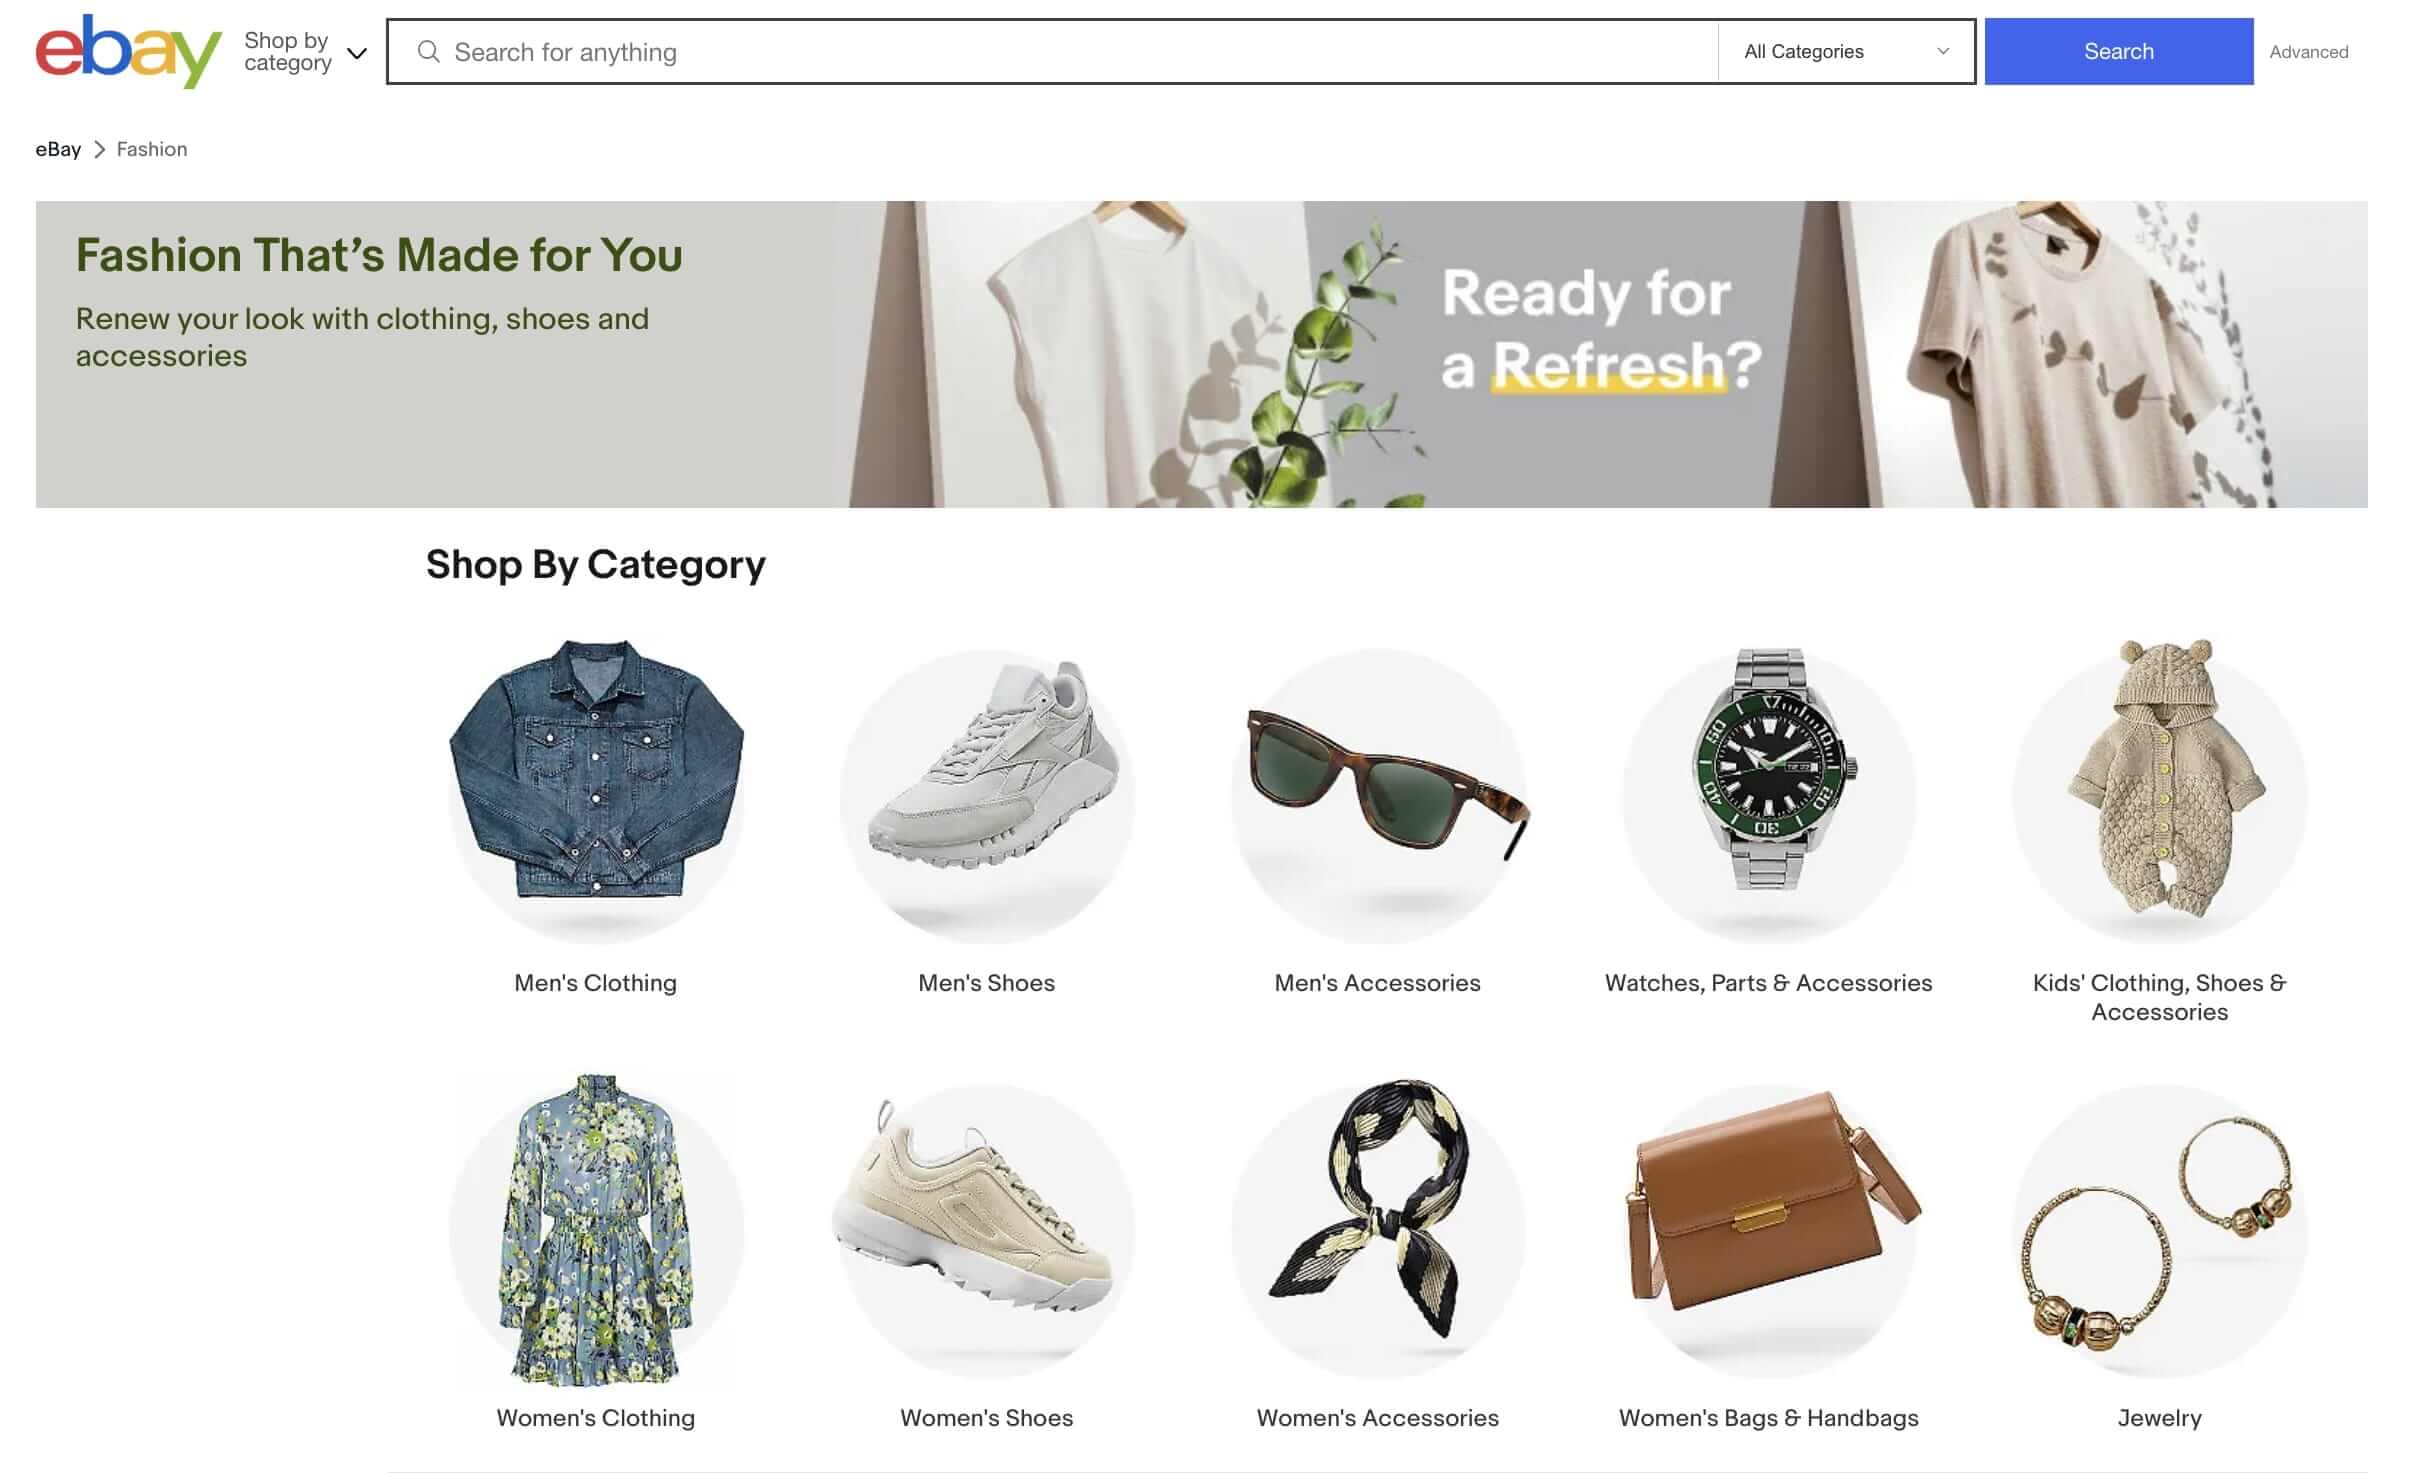 eBay's fashion page displaying men's, women's, and kid's clothing, shoes, and accessories.